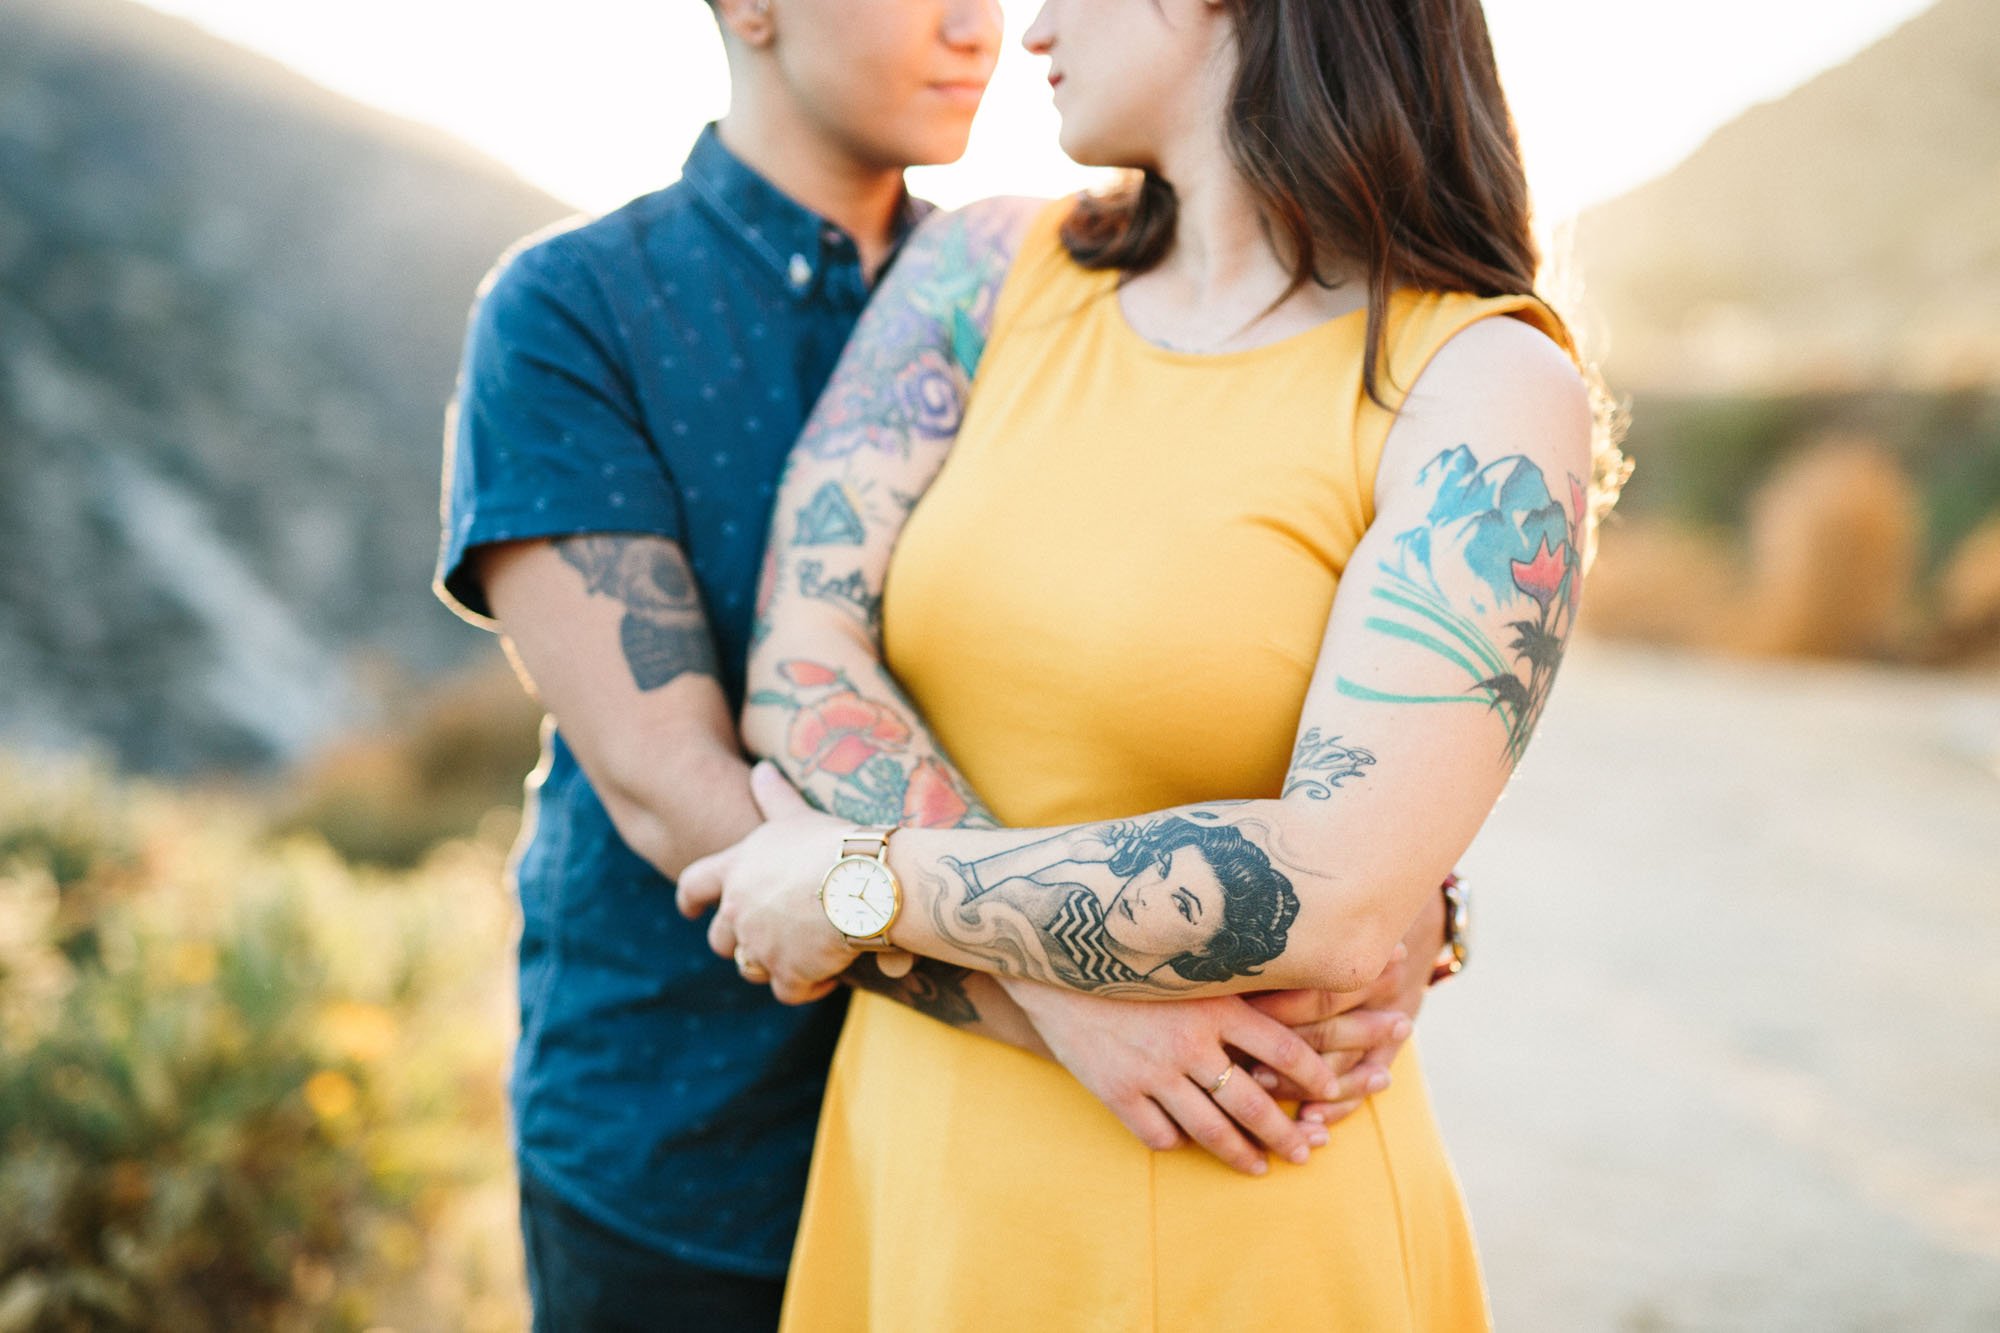 www-marycostaphotography-com-angeles-national-forest-engagement-0028